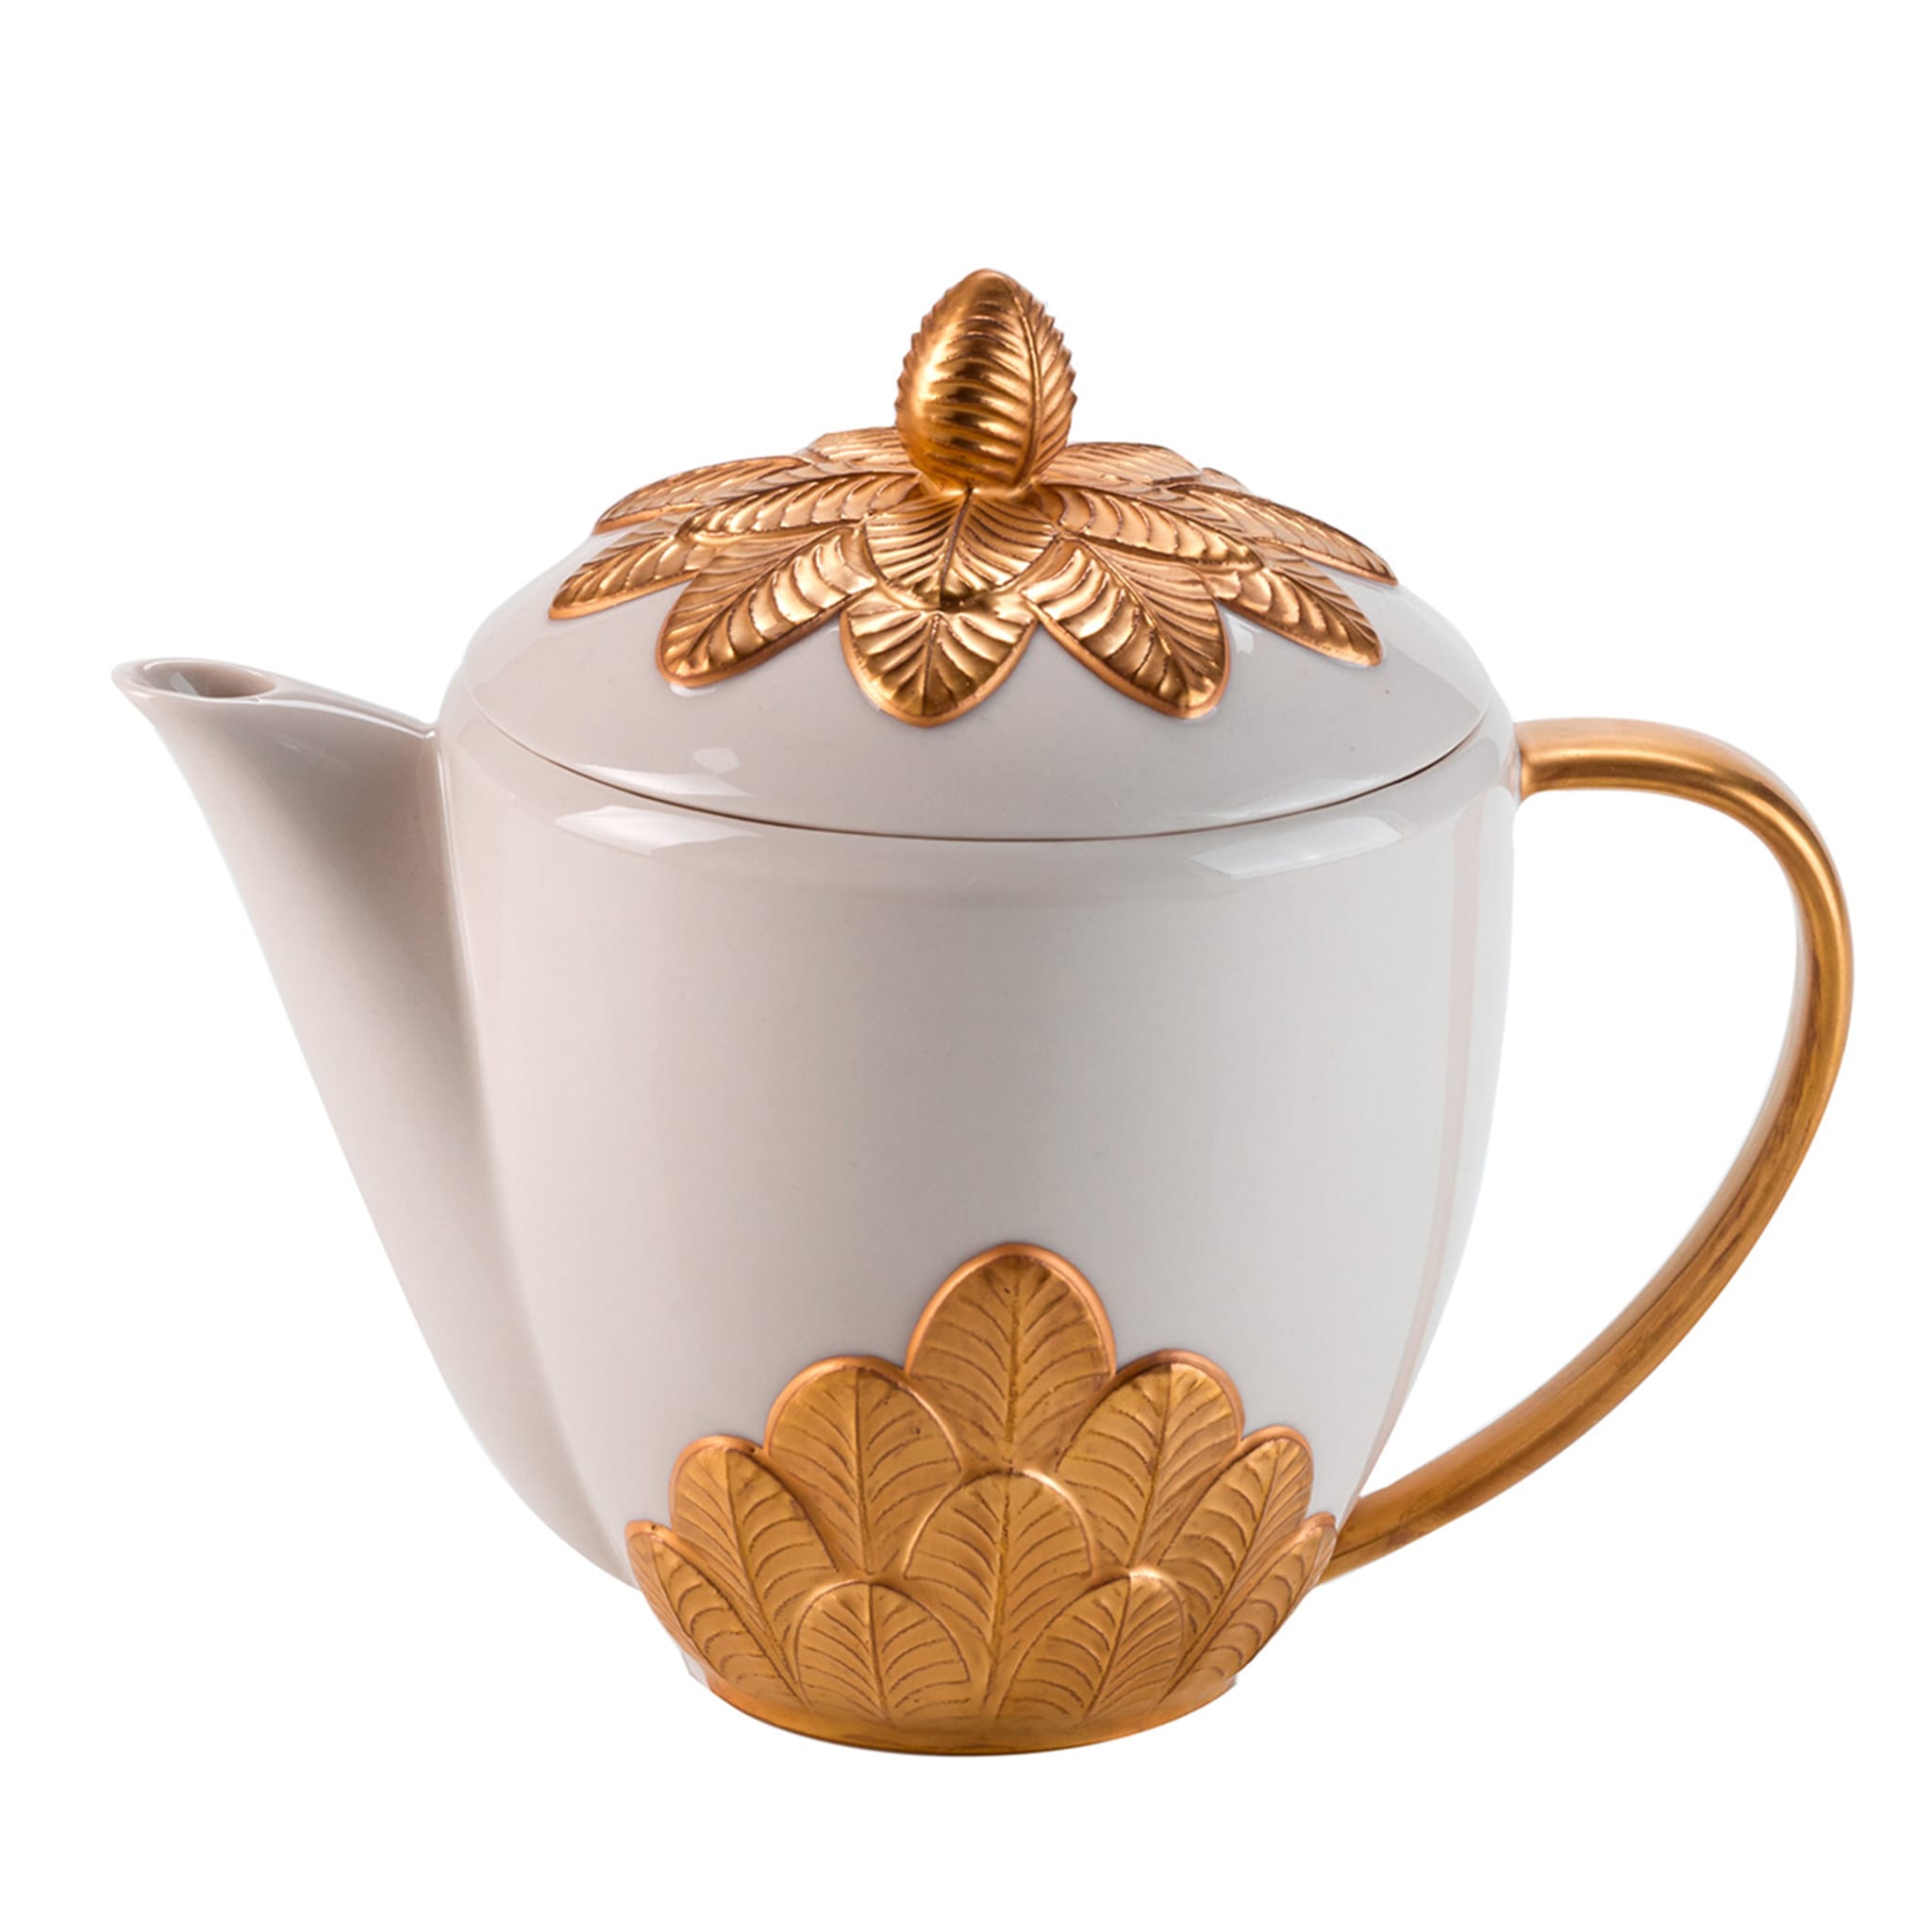 PEACOCK TEA POT - WHITE AND GOLD #2 - Main view